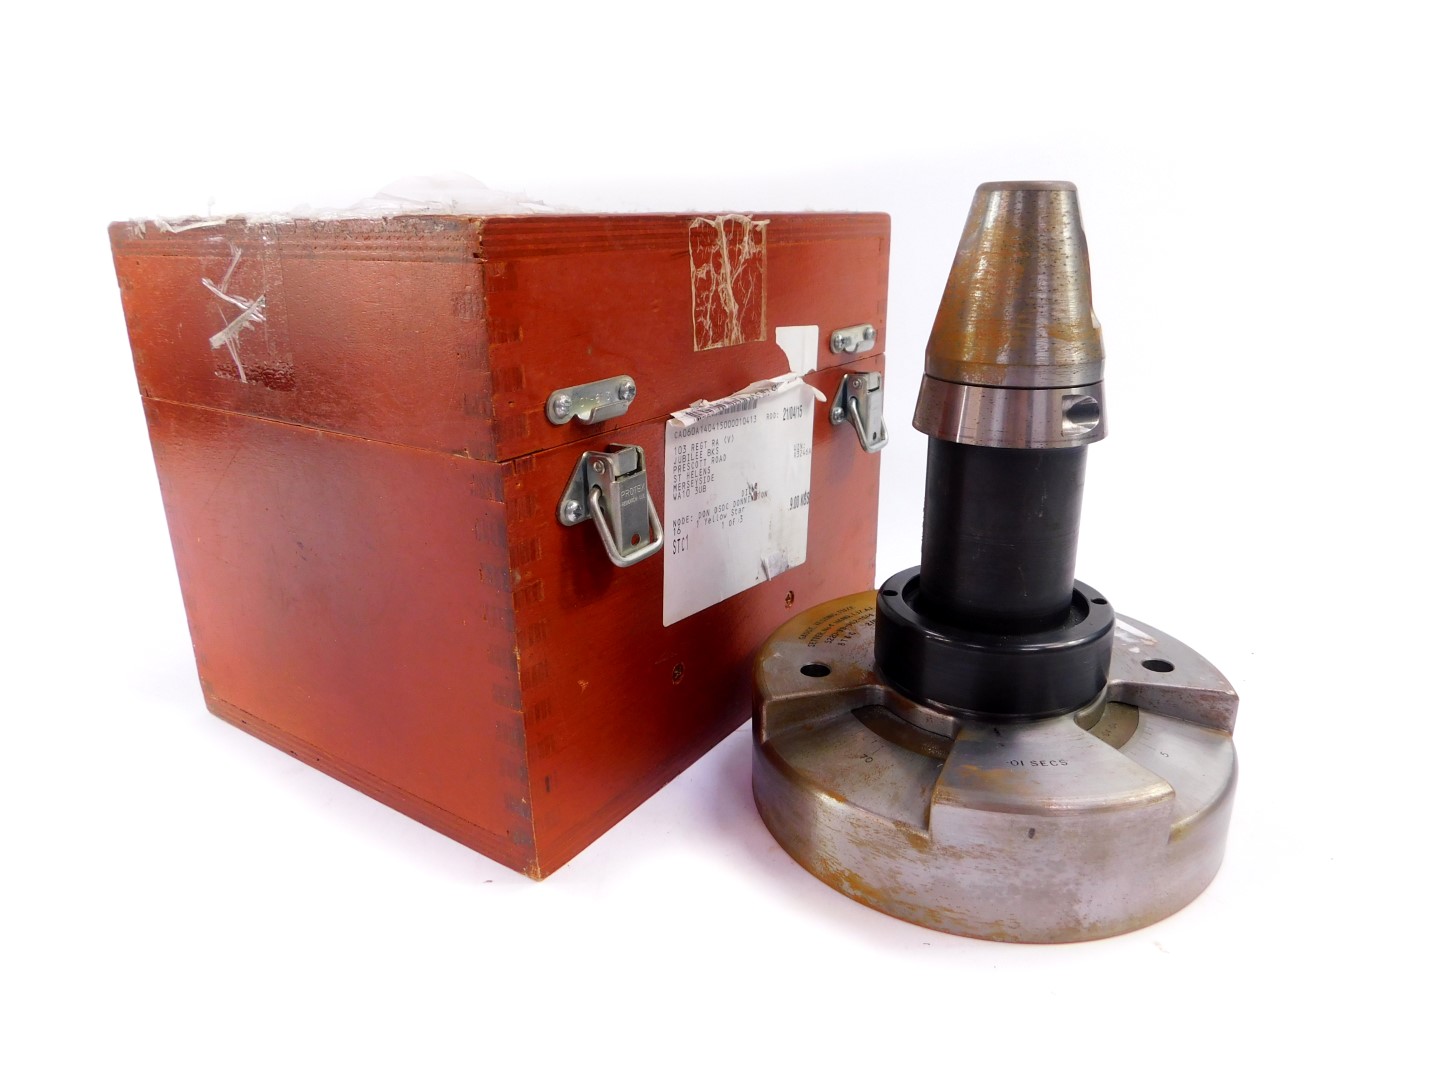 A bomb fuse setting gauge, with setter no 4Hand L.17.A.1, serial no 5220-99-962-1614, MOD valid